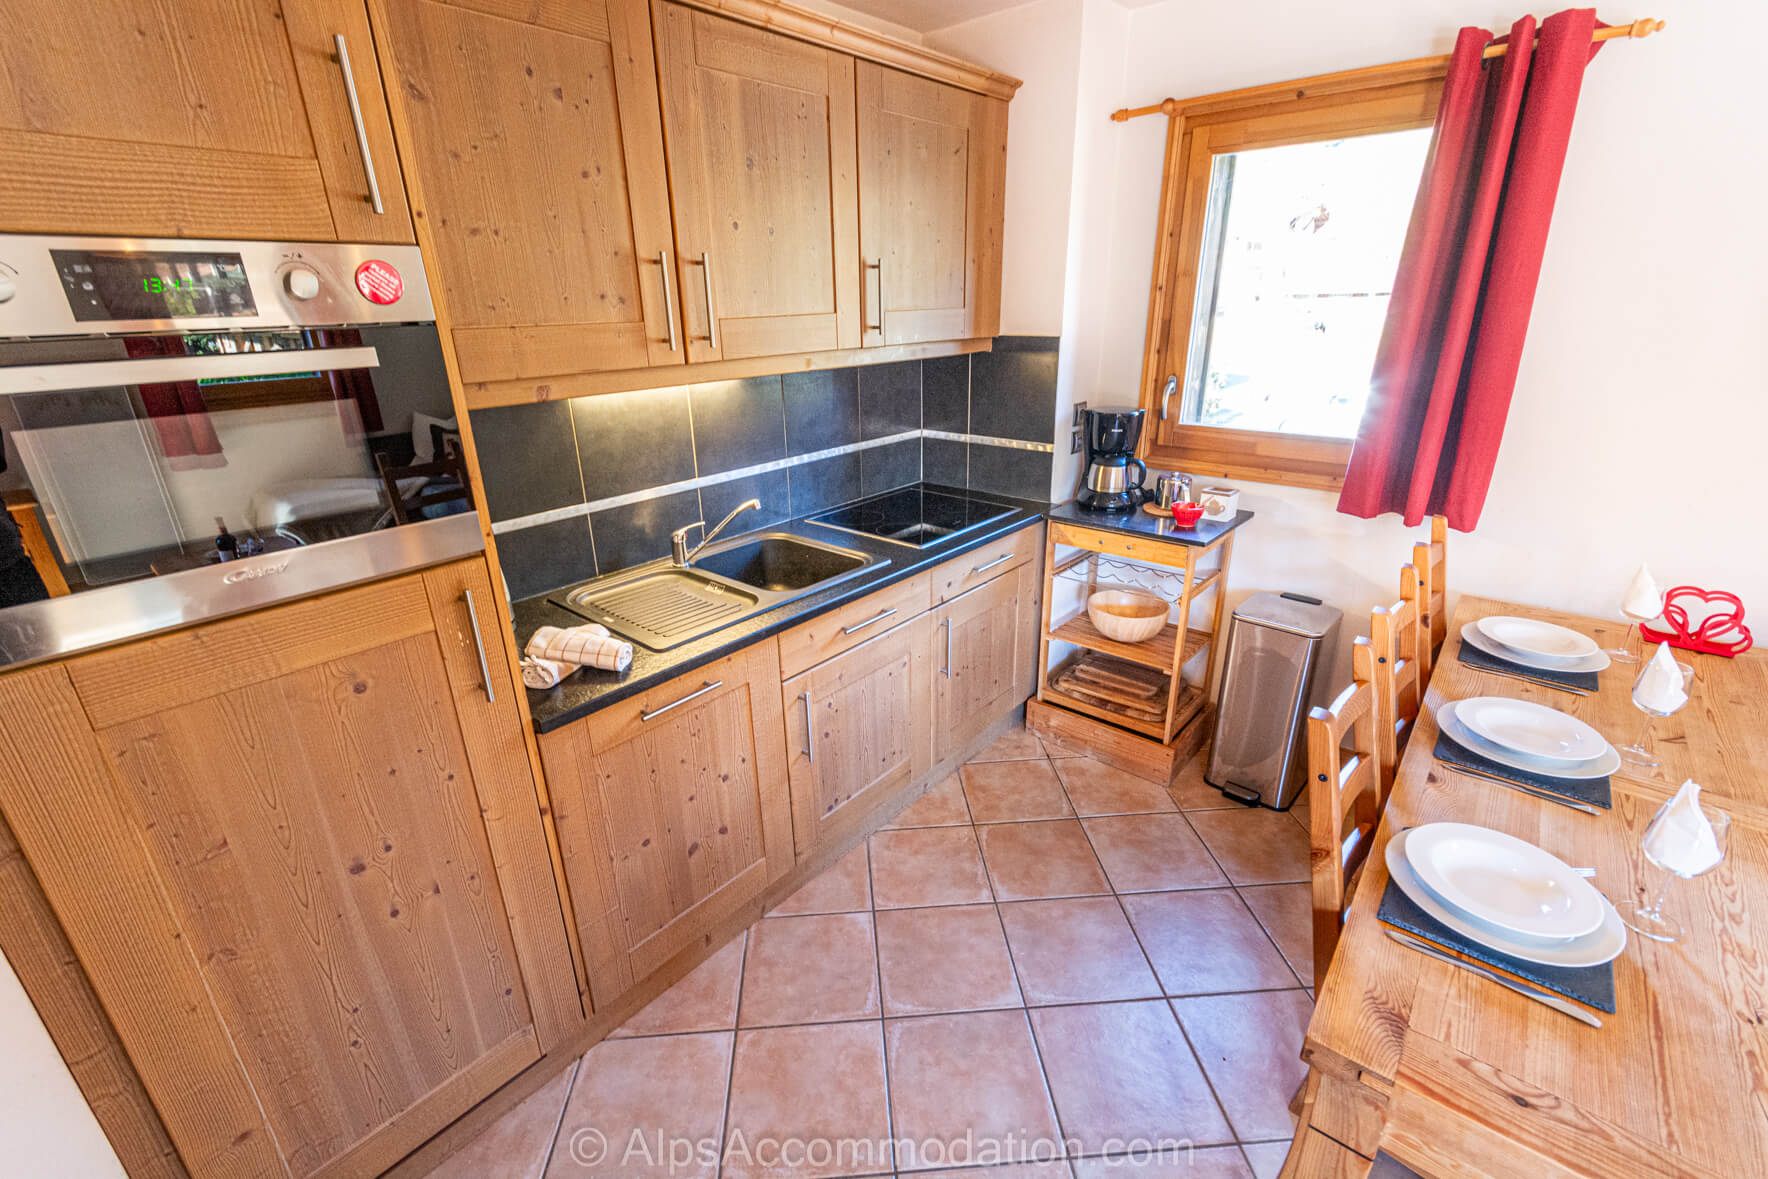 Chardons Argentes H8 Samoëns - Fully equipped kitchen